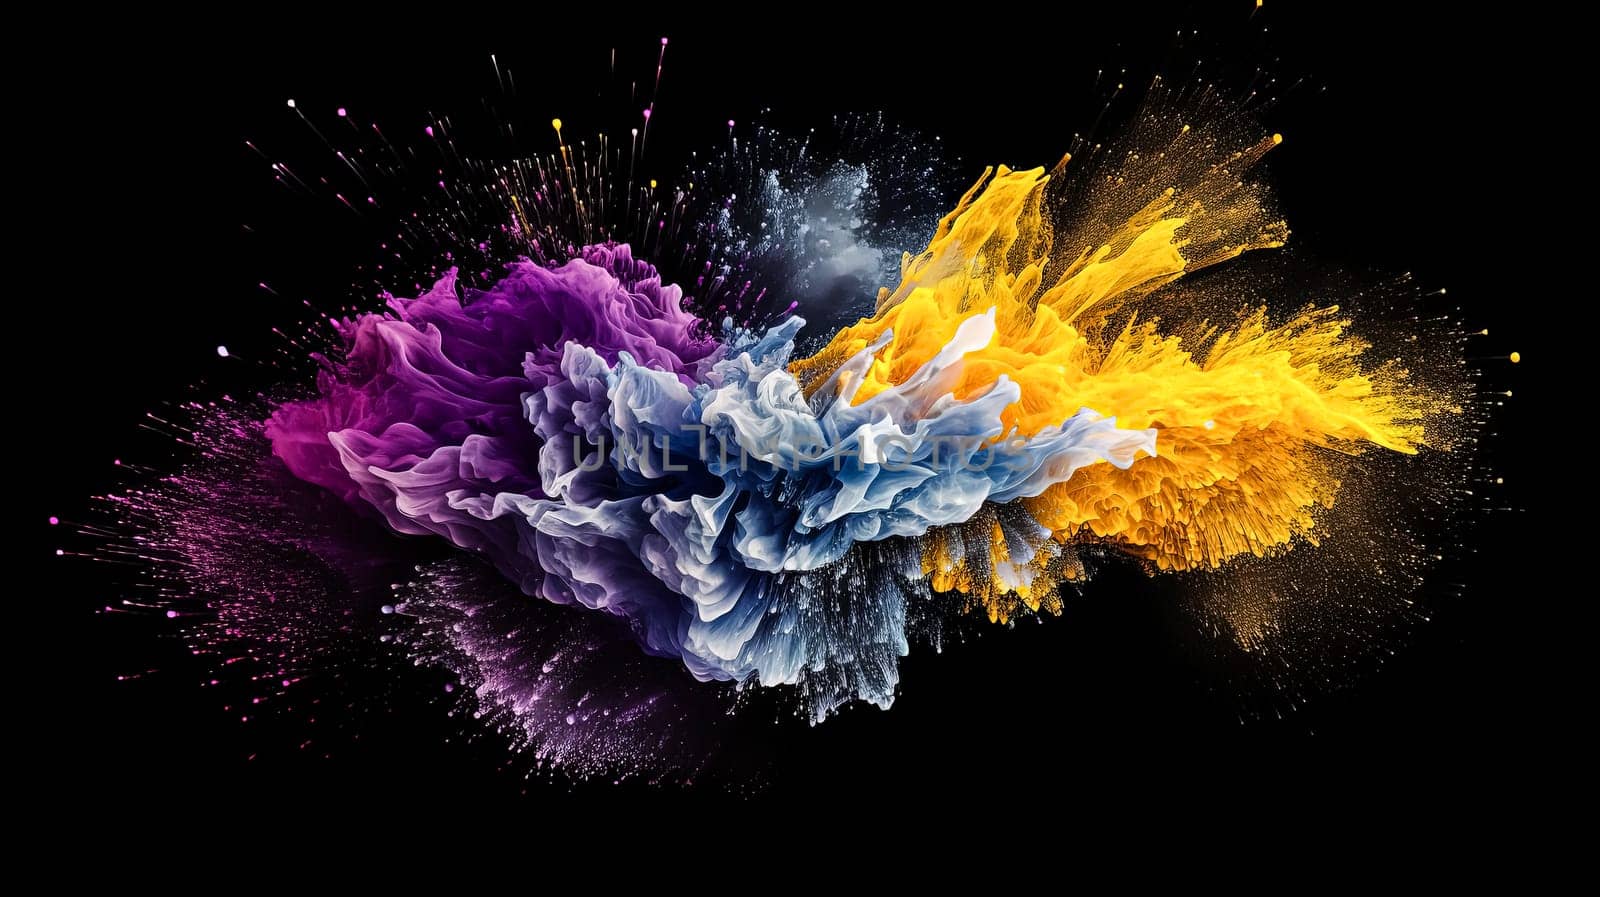 A colorful explosion of paint is shown in the image. The colors are bright and vibrant, creating a sense of energy and excitement. The explosion appears to be a burst of creativity